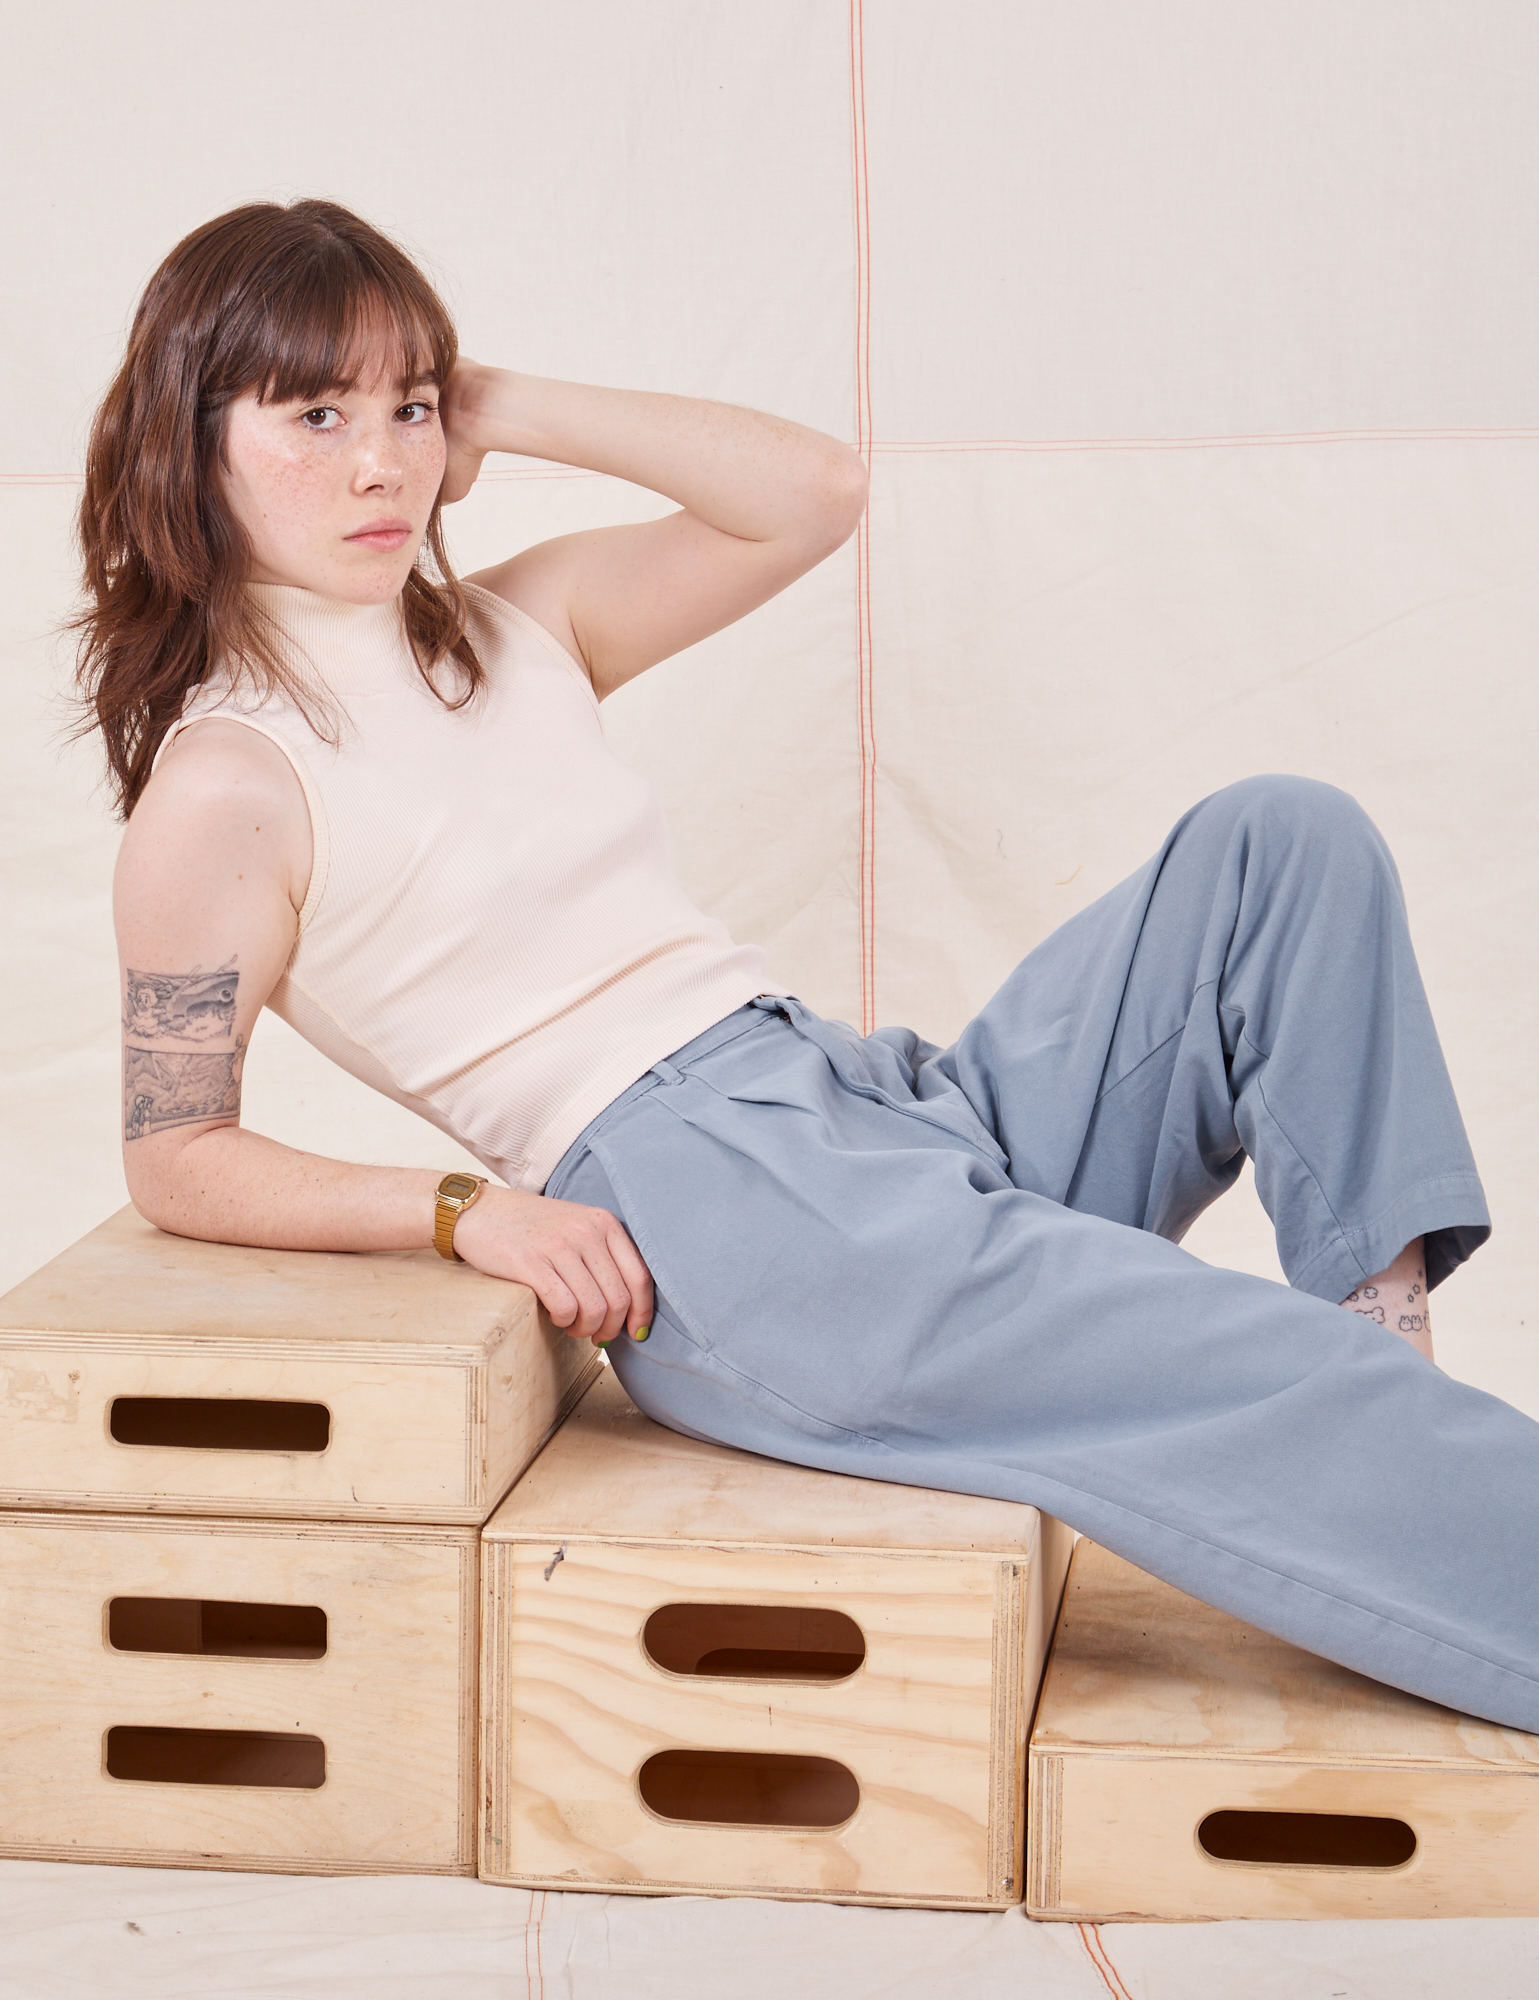 Hana is wearing Organic Trousers in Periwinkle and Sleeveless Turtleneck in vintage tee off-white